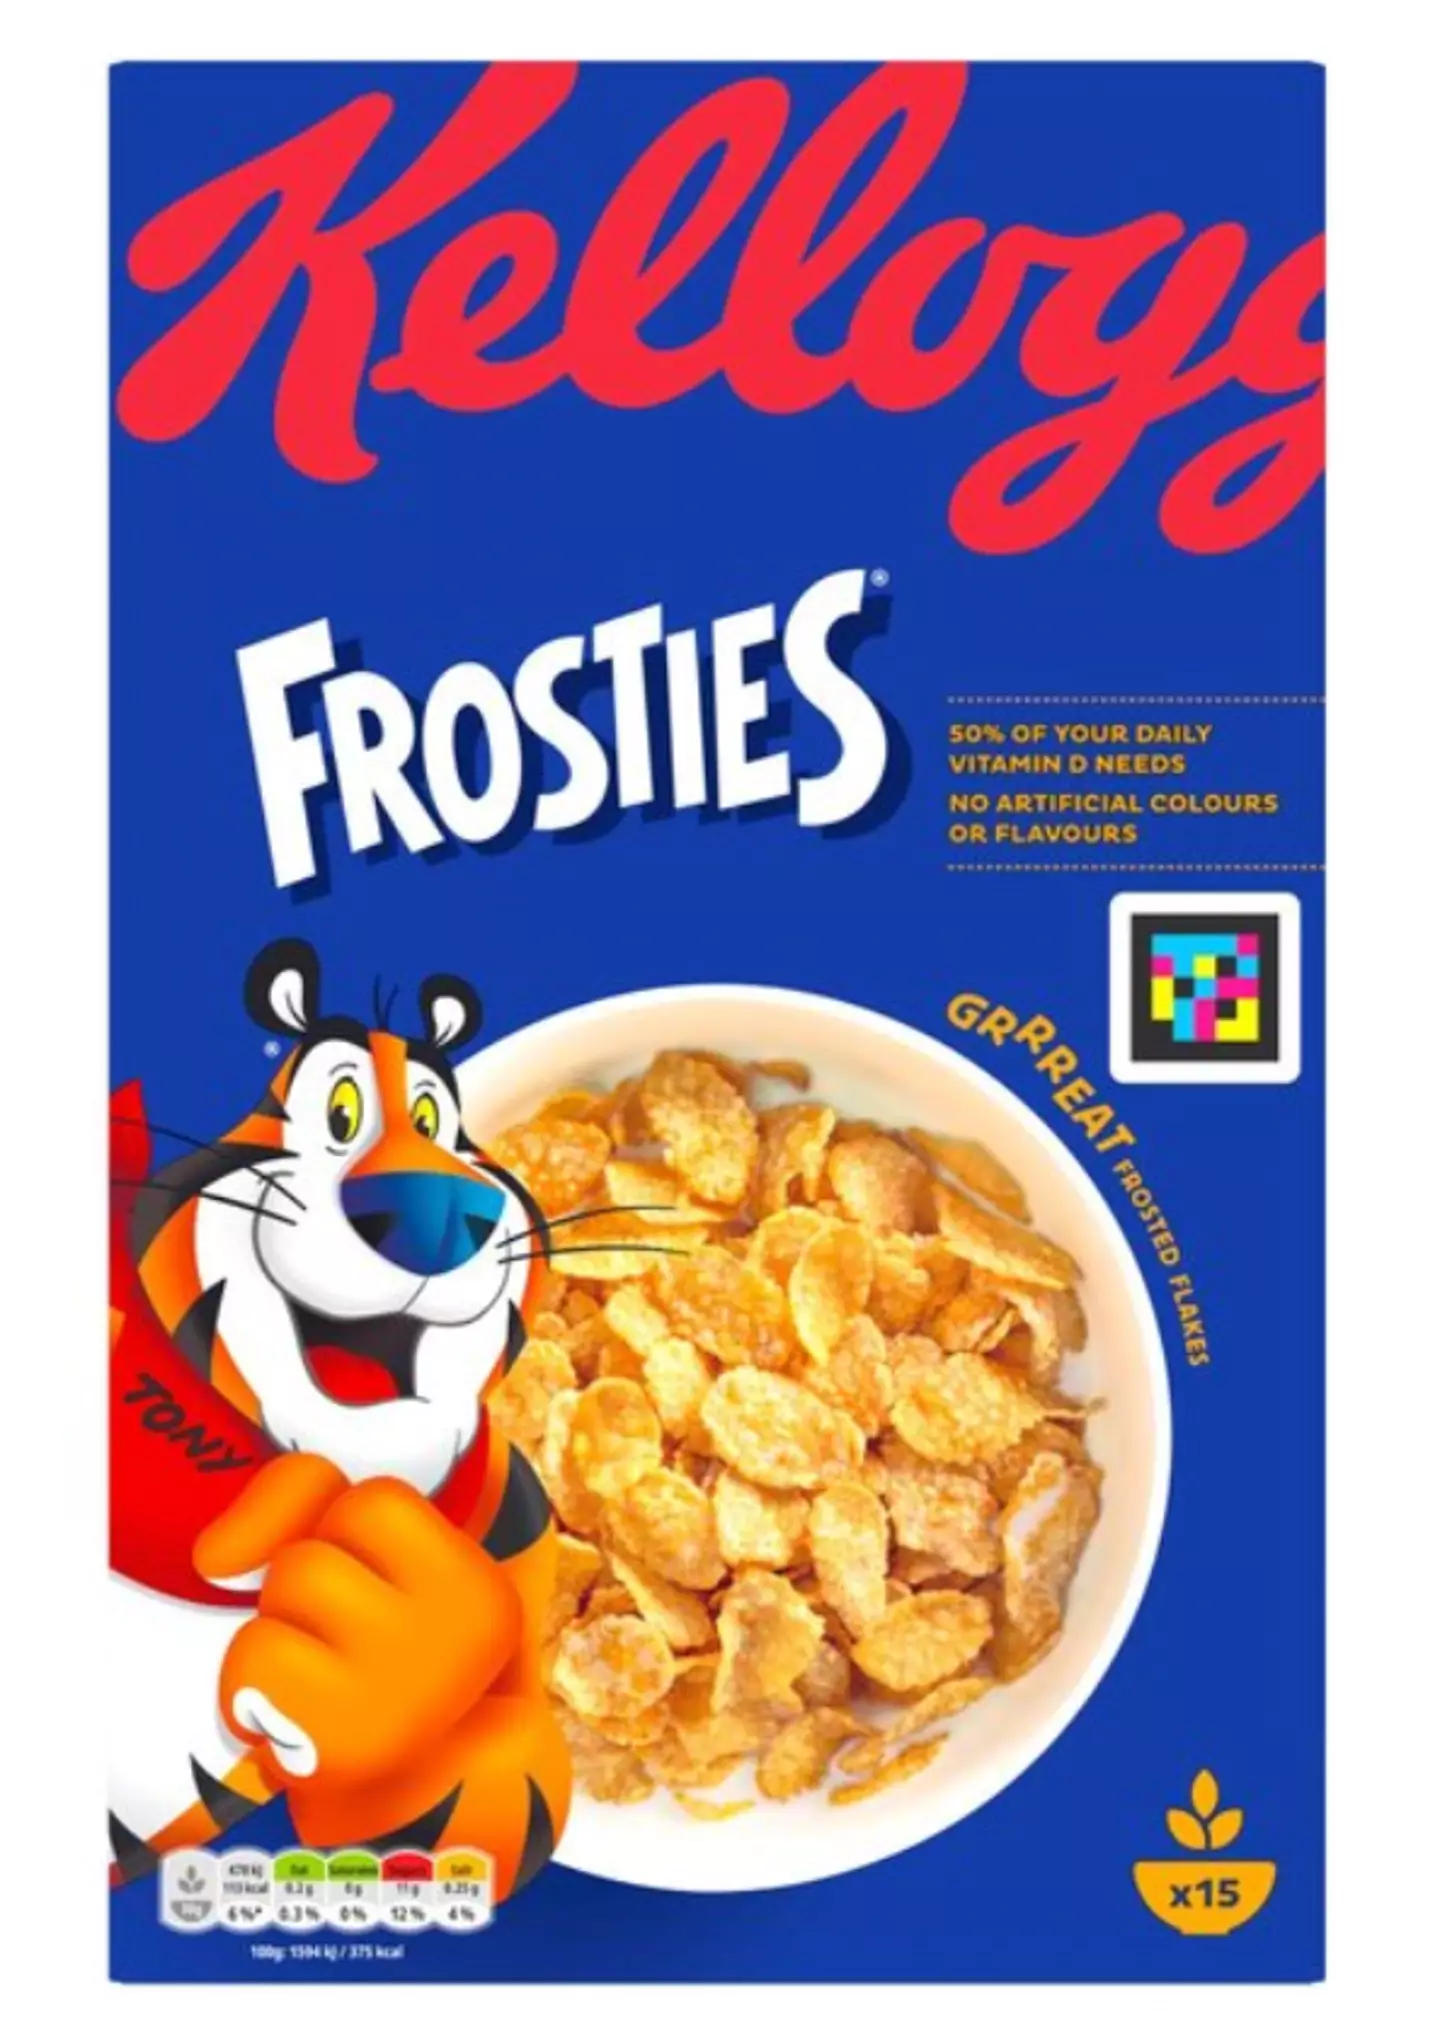 Frosties contain a lot of sugar, which doesn't come as a surprise to anyone.